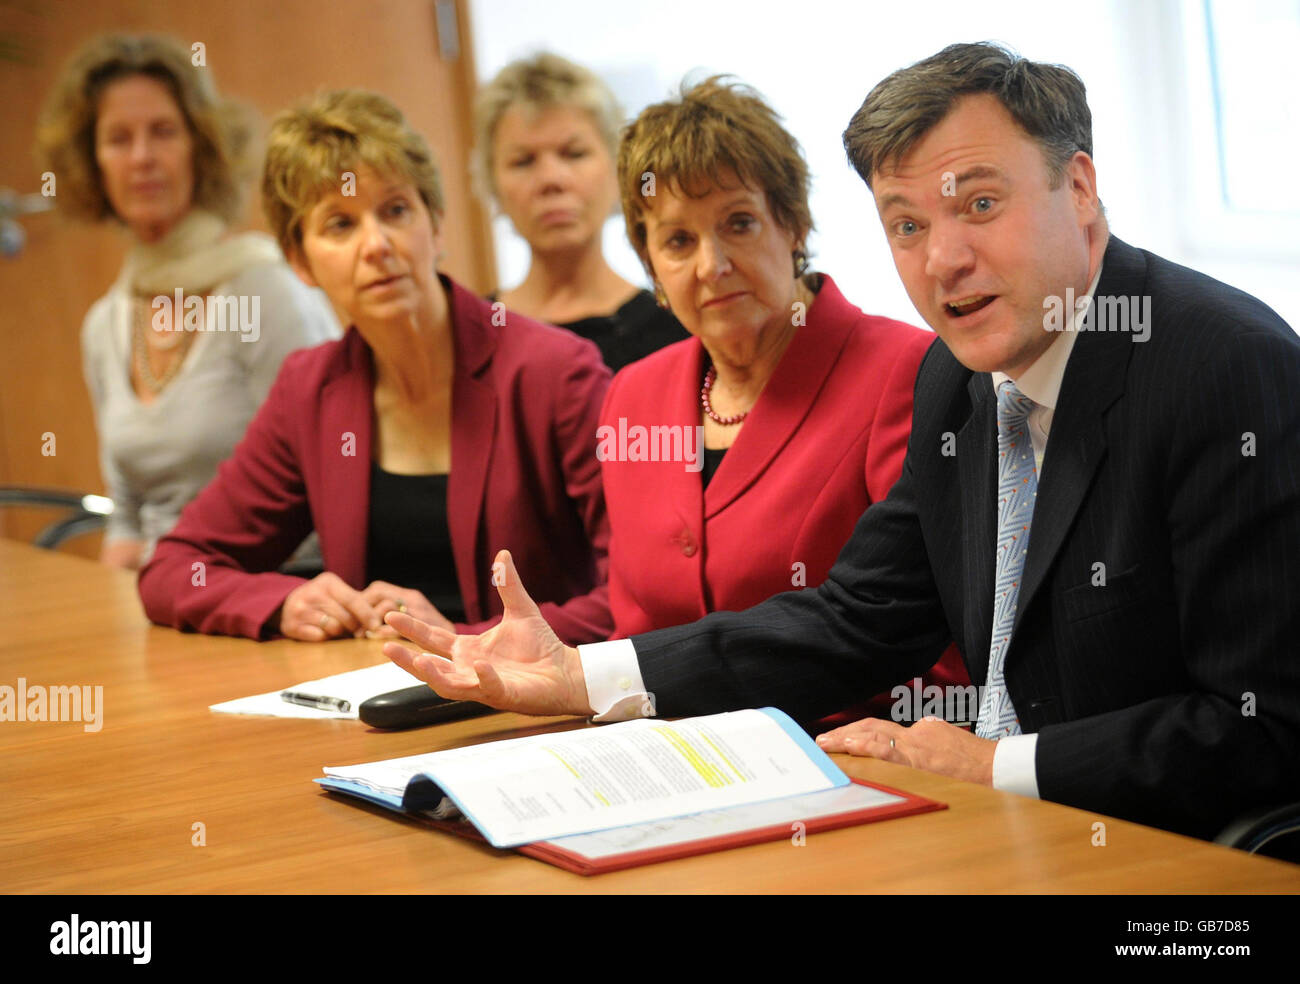 Children's Secretary Ed Balls meets with 17 of the country's 'Agony Aunts' at his office in London today where they discussed how the government can provide better support for children and parents facing family breakdown. (left to right) Zelda West-Meads, Linda Blair, Sally Brampton, Deidre Sanders and Ed Balls. Stock Photo